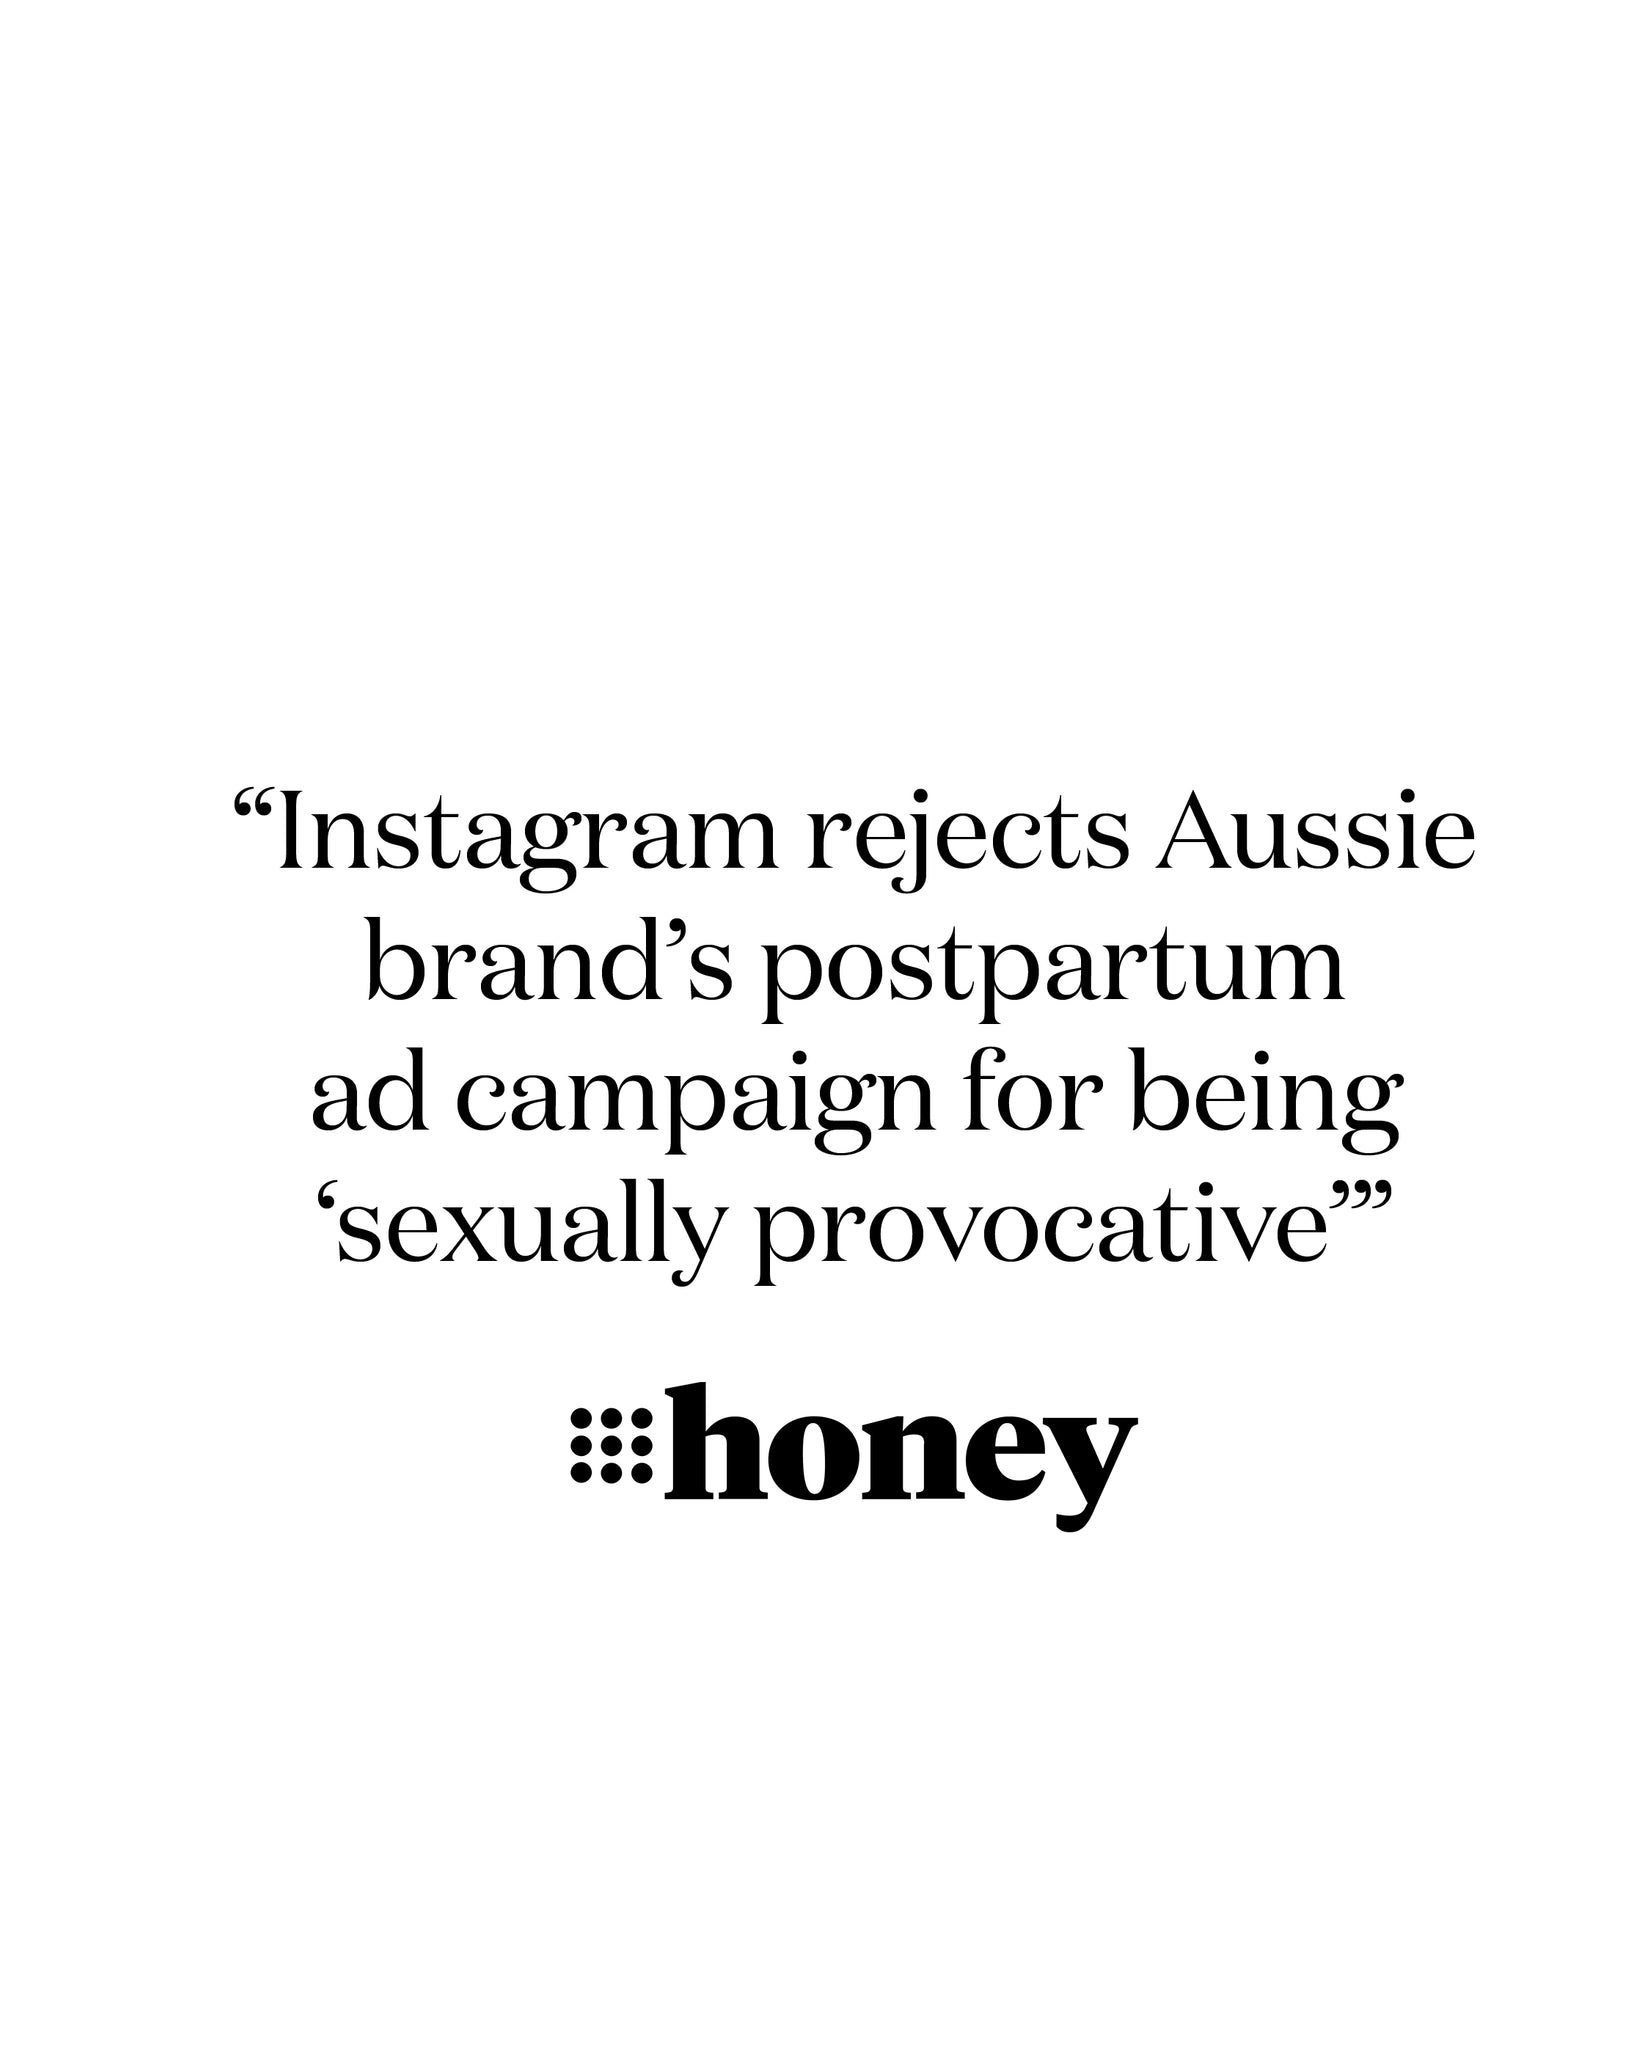 Instagram rejects Aussie brand's postpartum ad campaign for being 'sexually provocative'